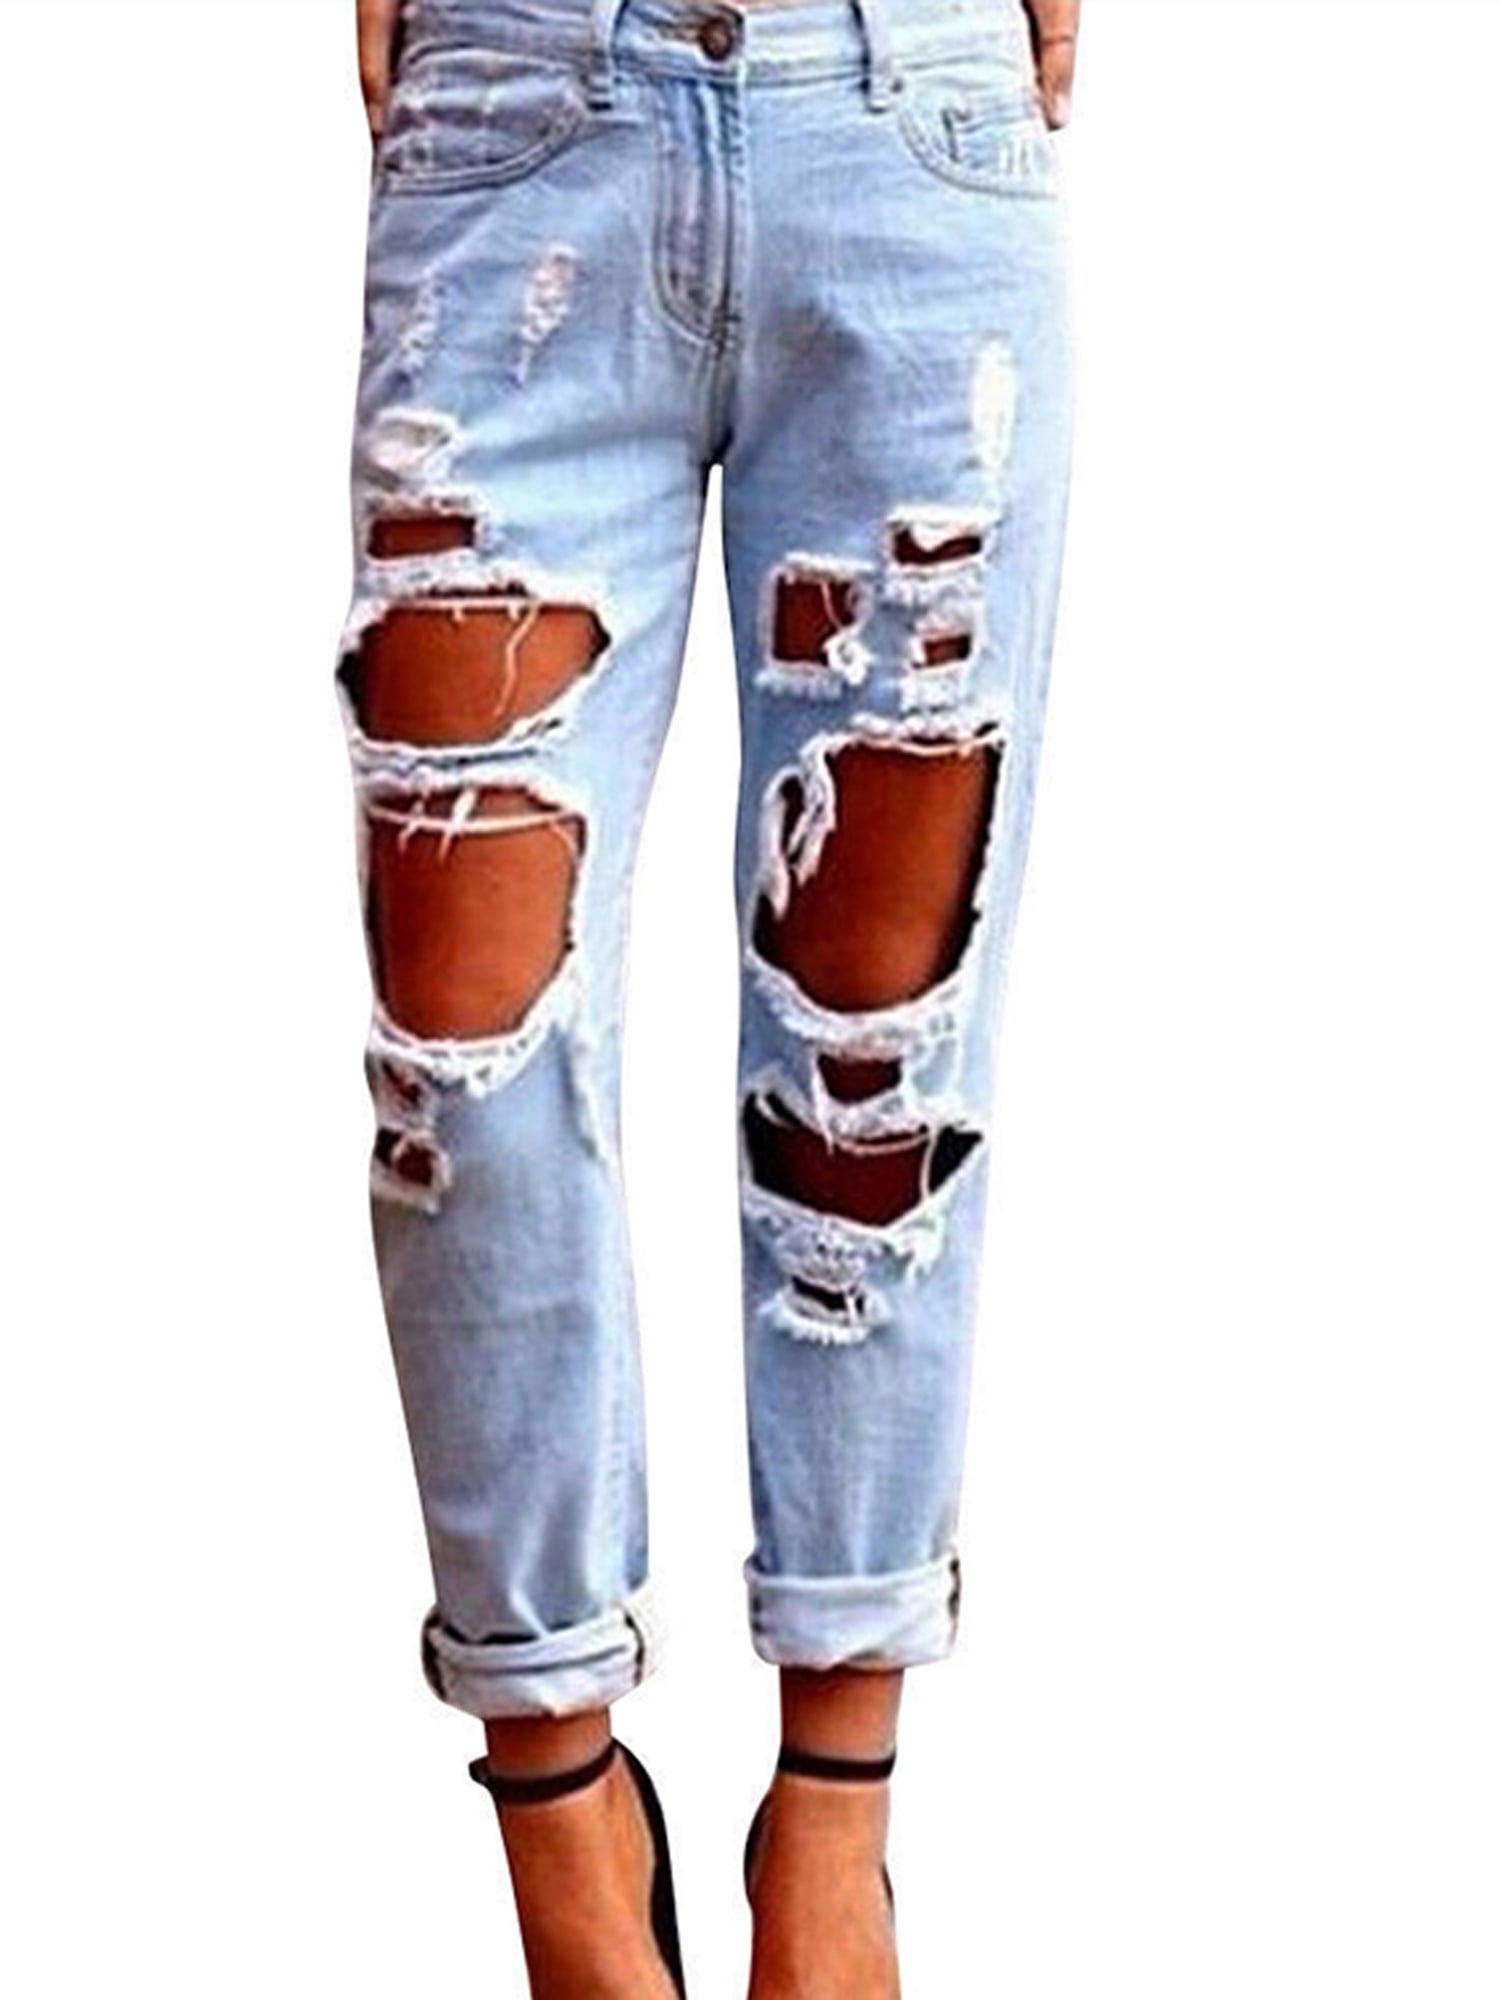 Women's Ripped Destroyed Hole Jeans 